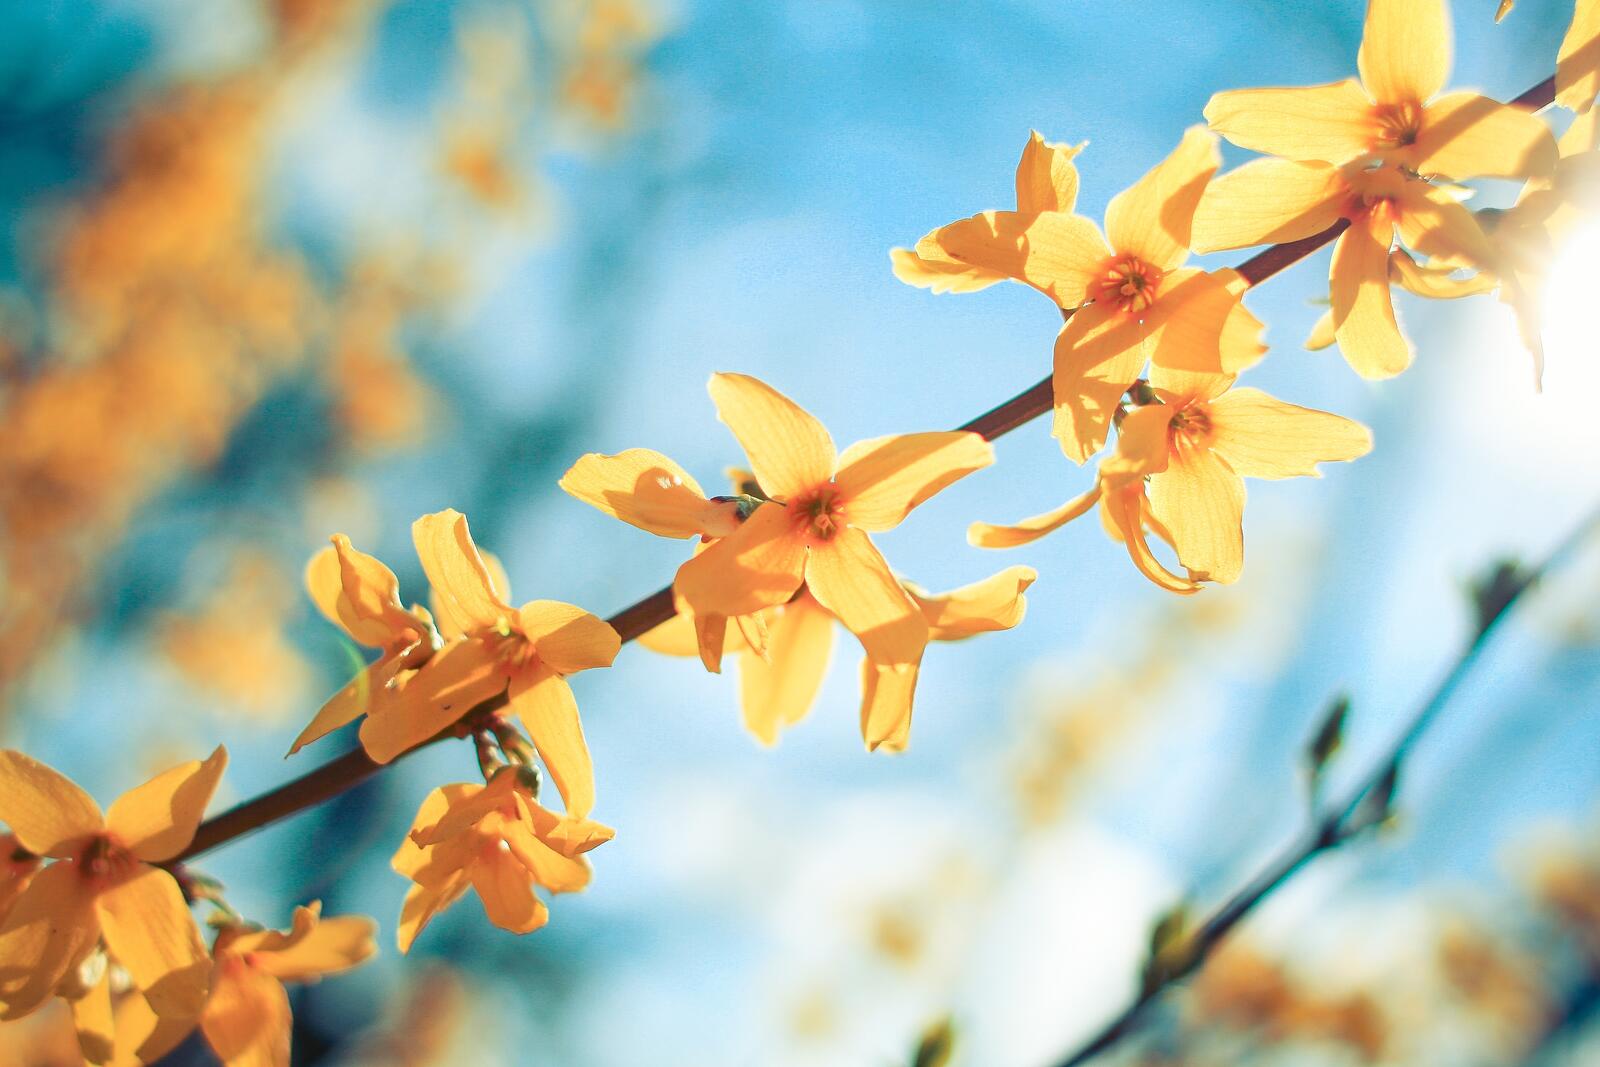 Free photo A sprig of yellow flowers